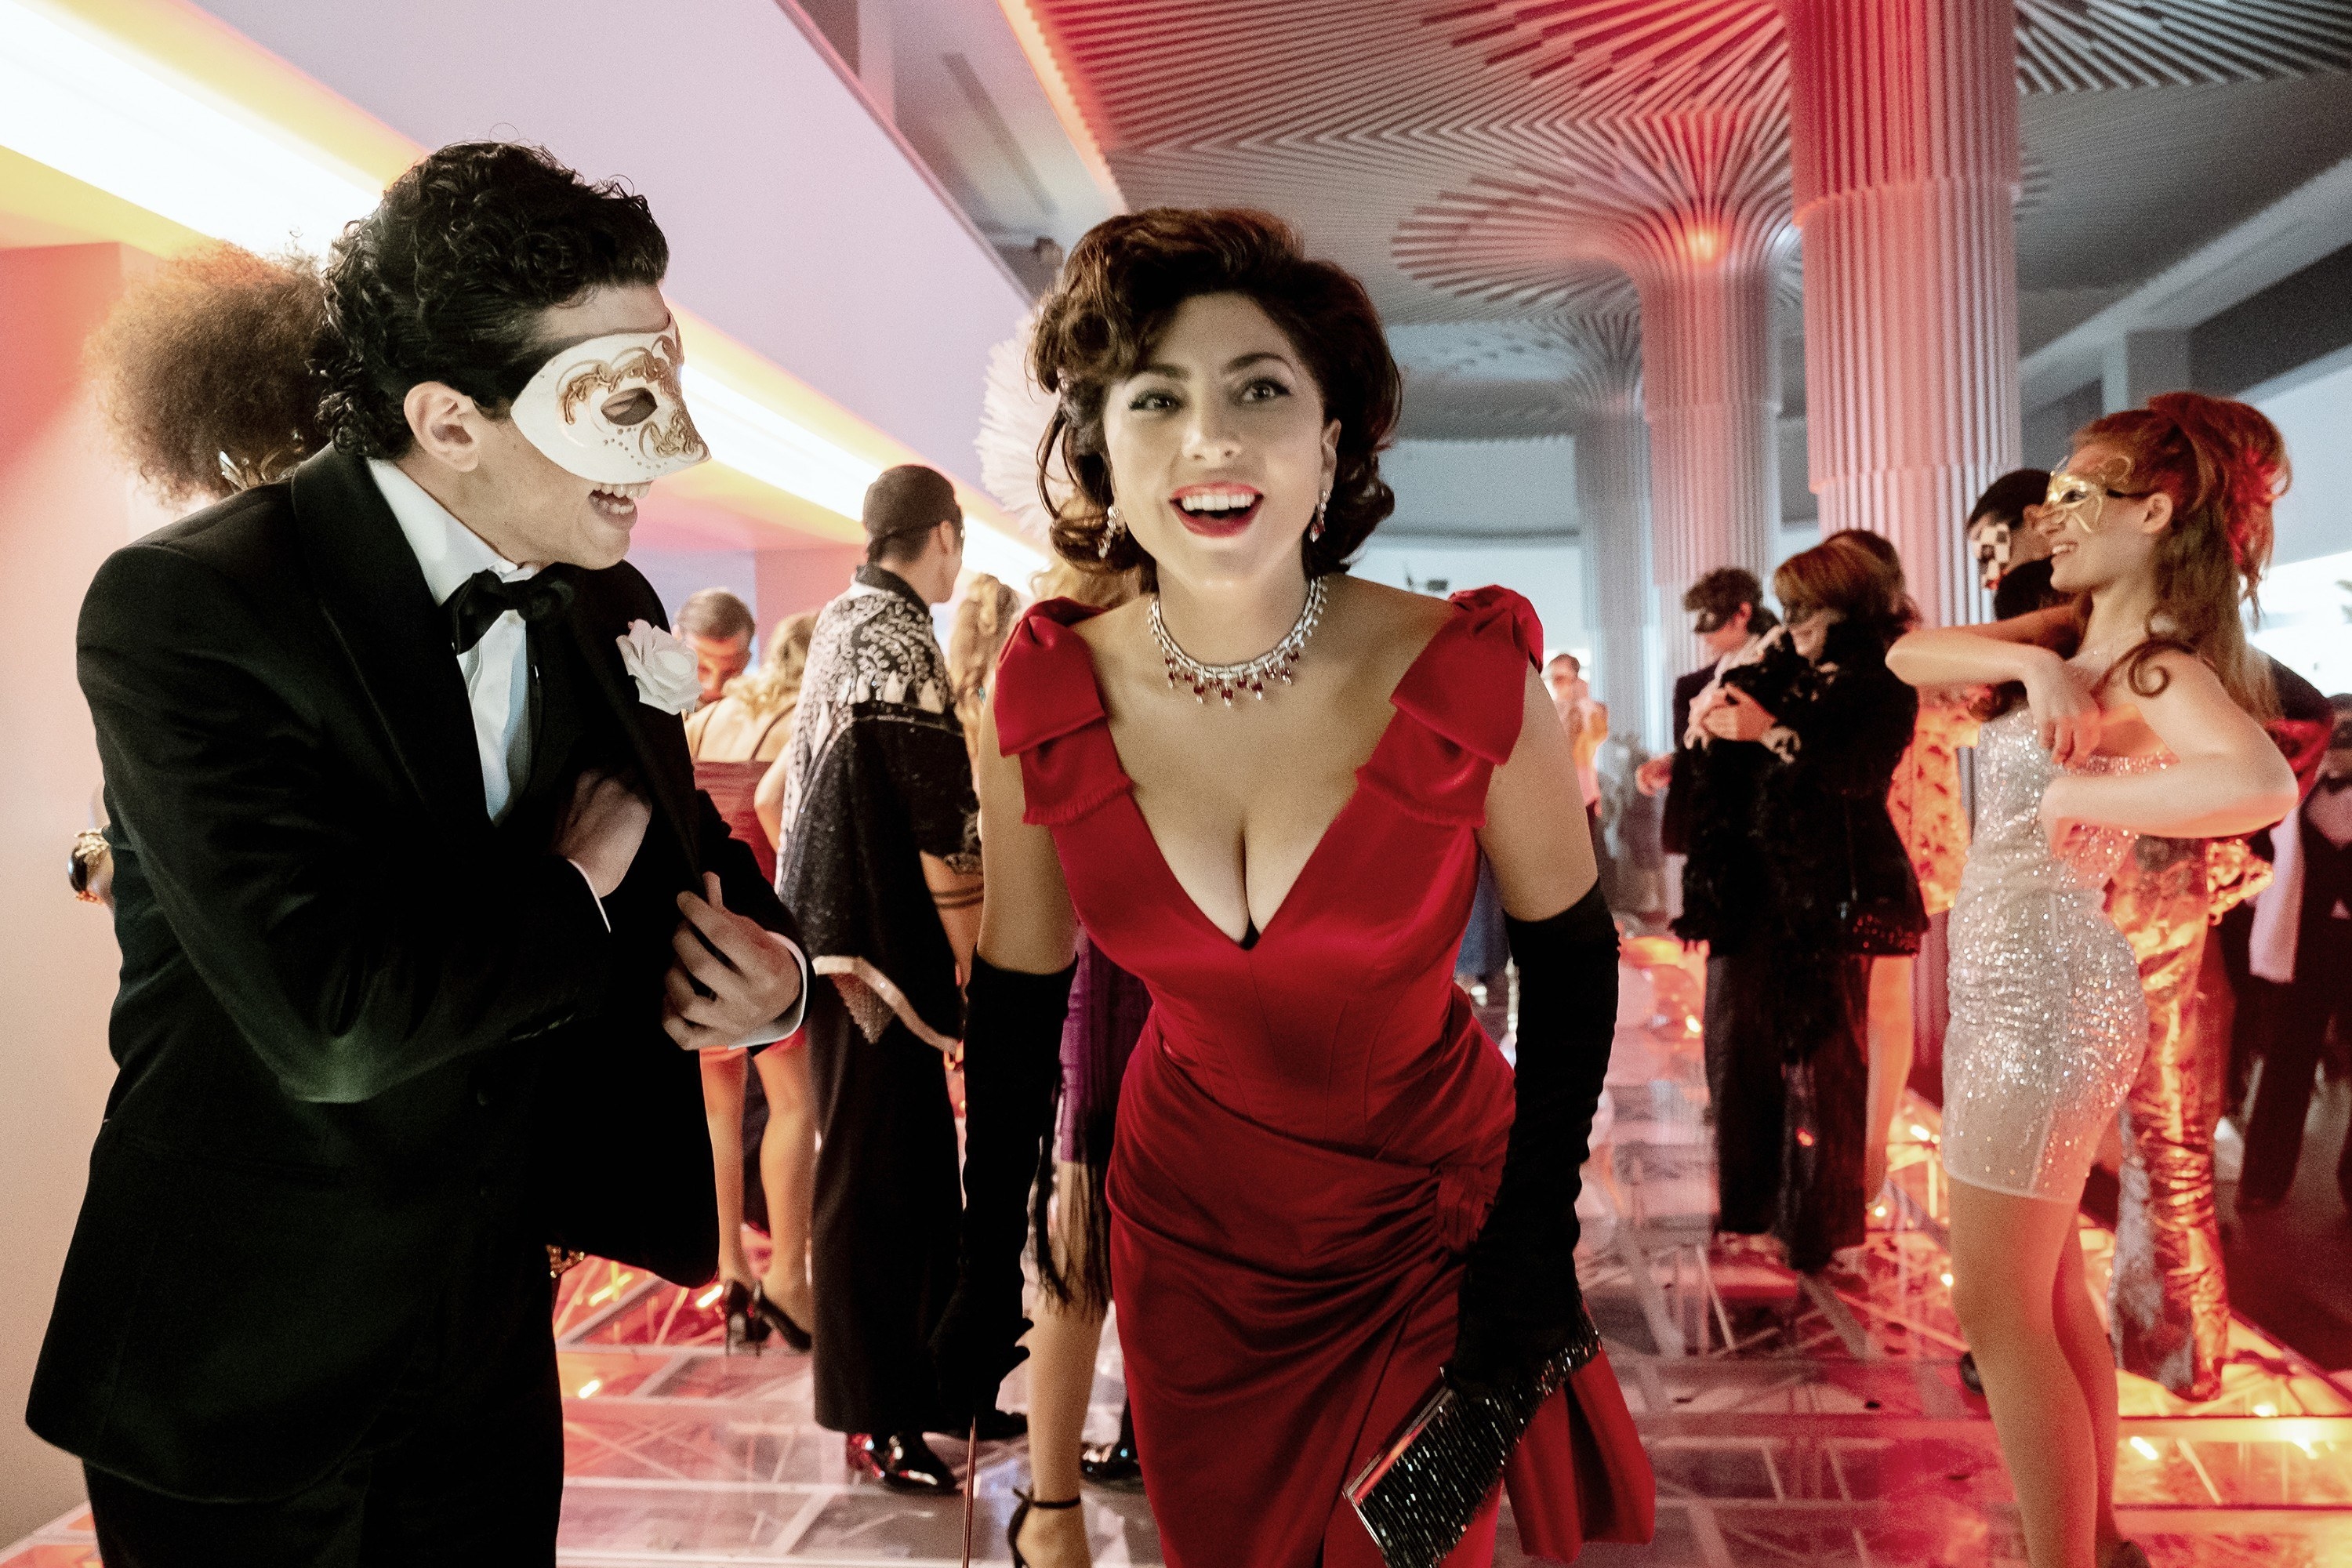 Gaga smiles while attending a masquerade ball in the movie